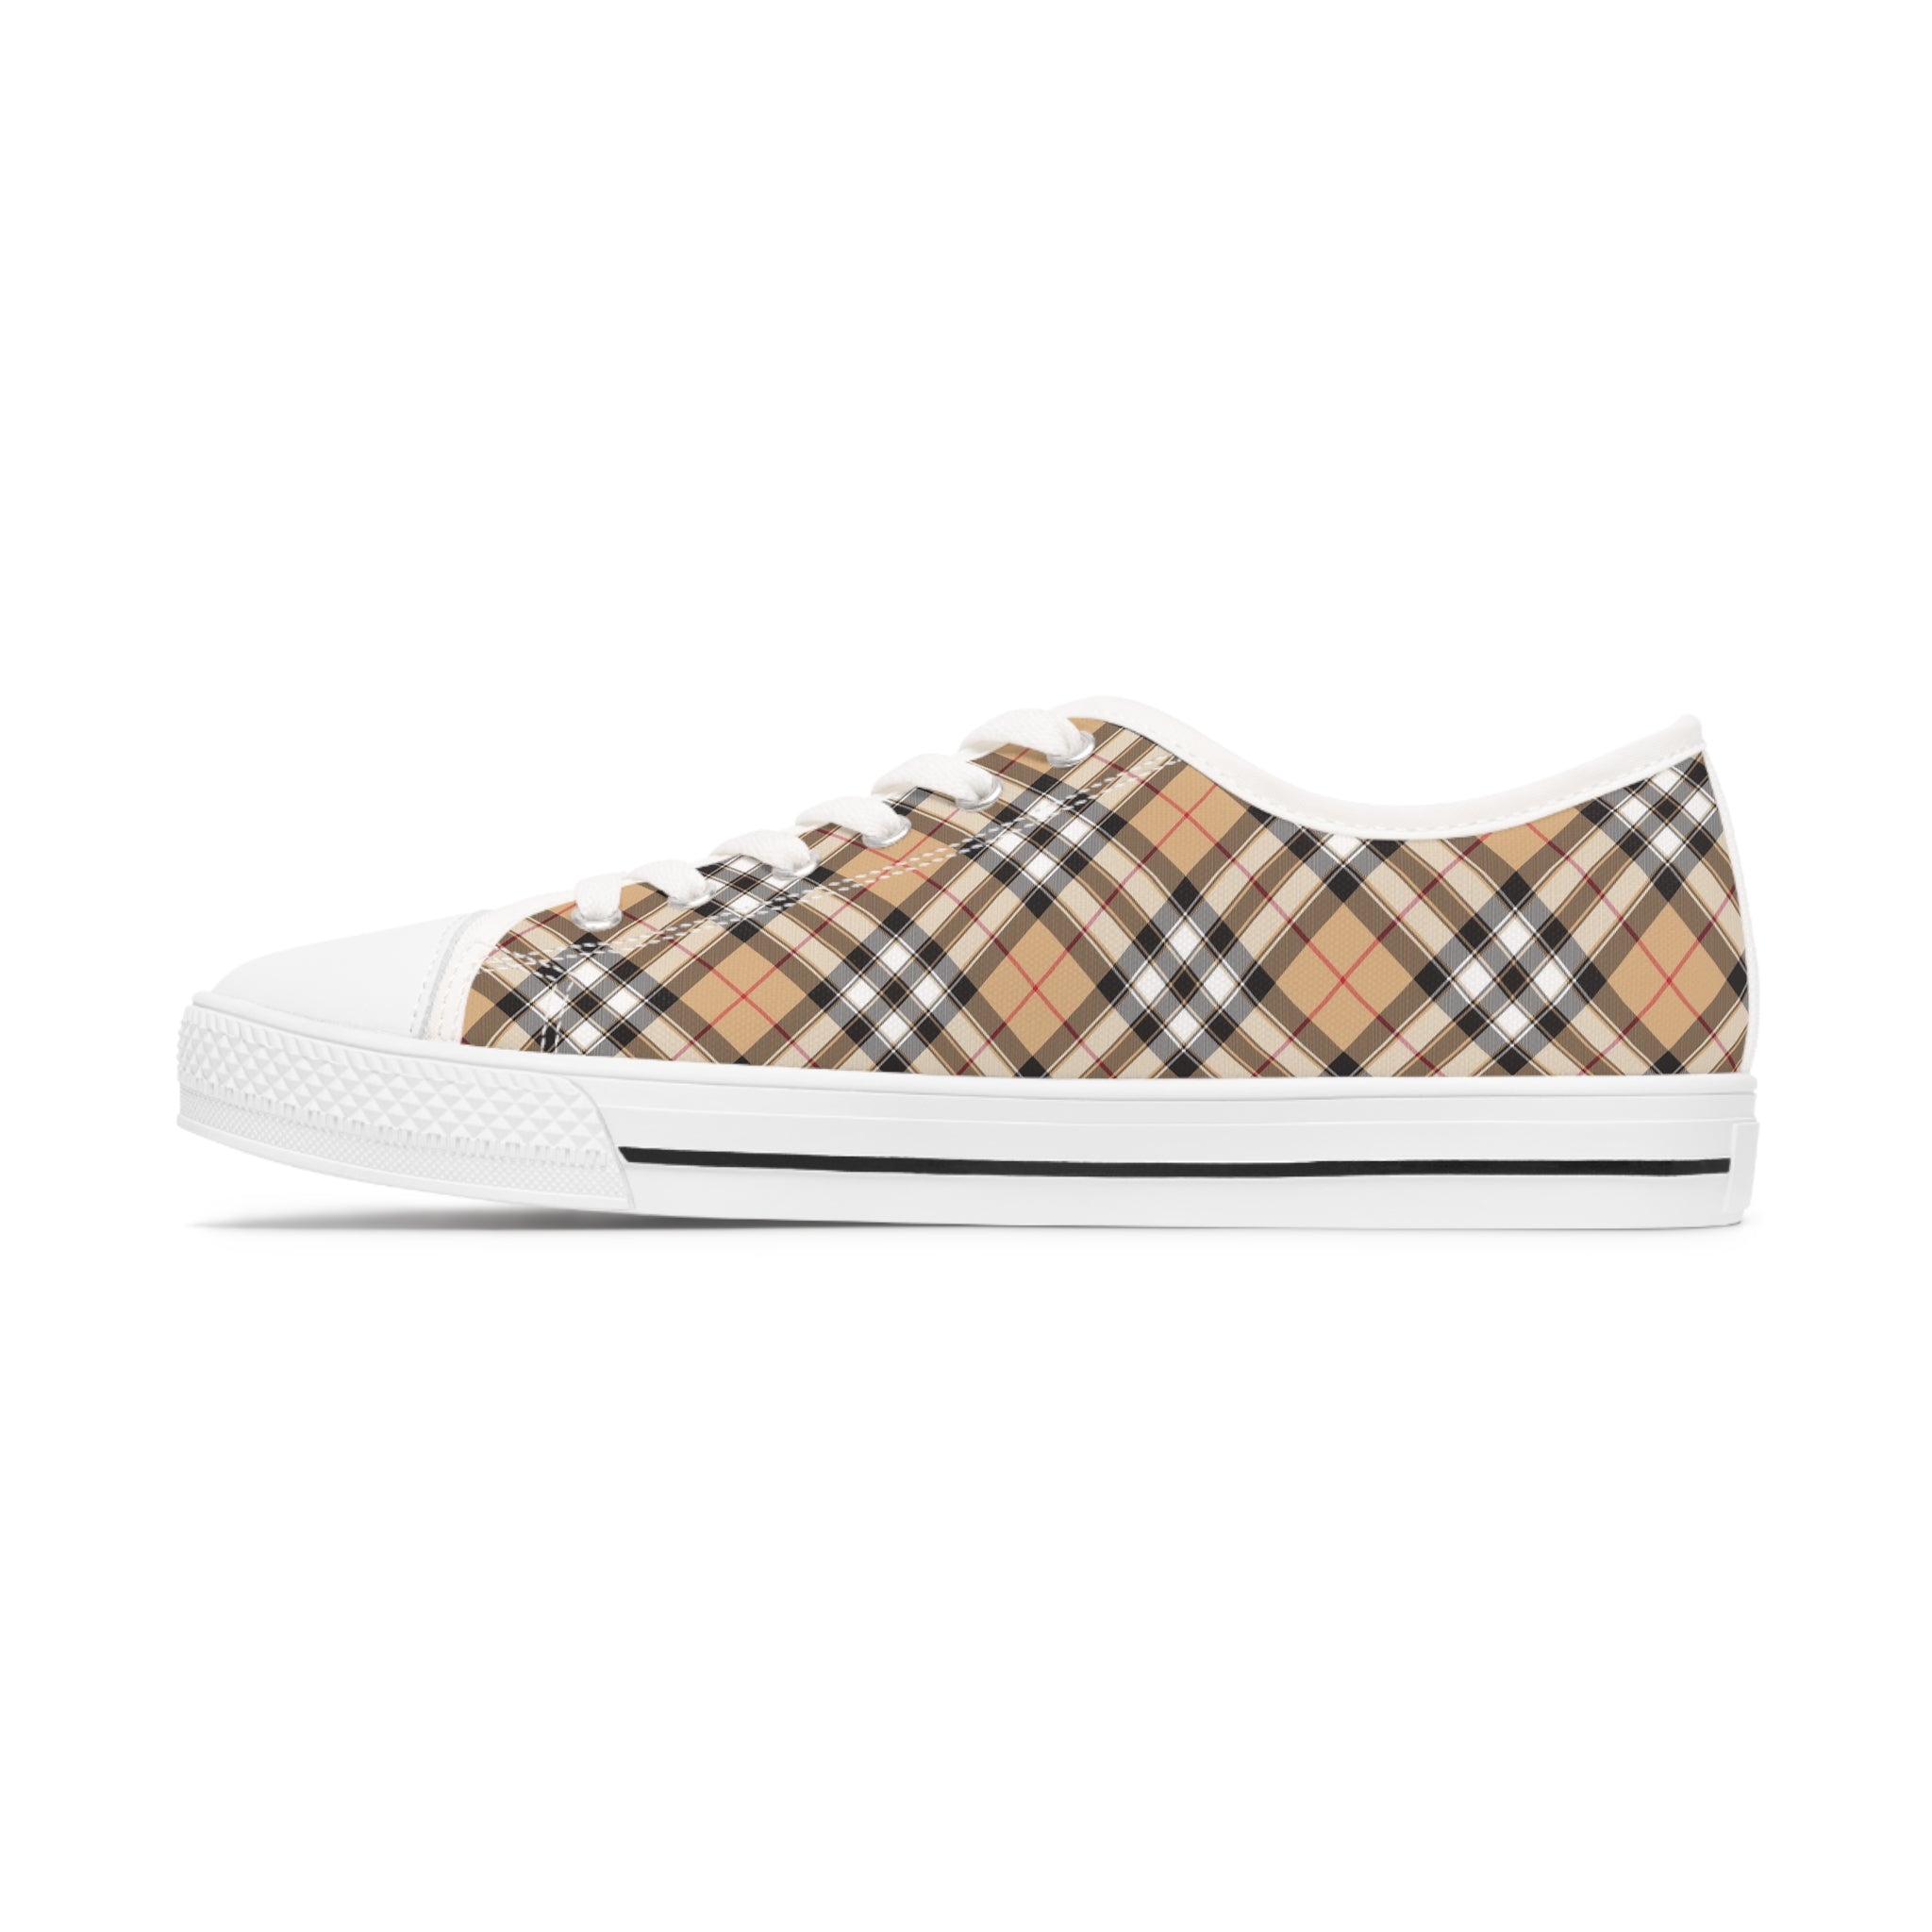  Groove Collection in Plaid (Red Stripe) Women's Low Top White Canvas Shoes Shoes